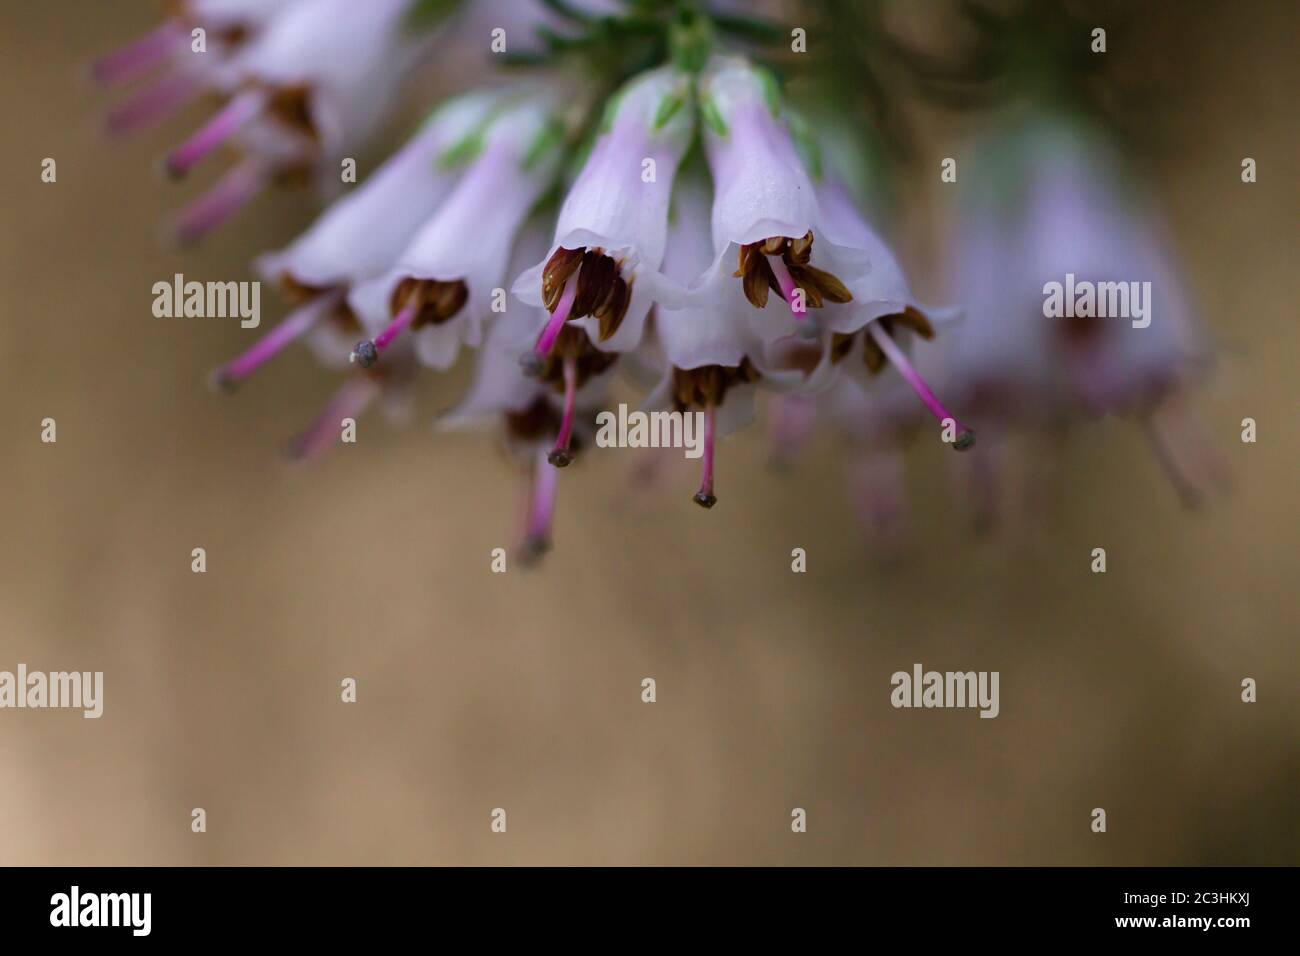 Detail of erica arborea white flowers blooming Stock Photo